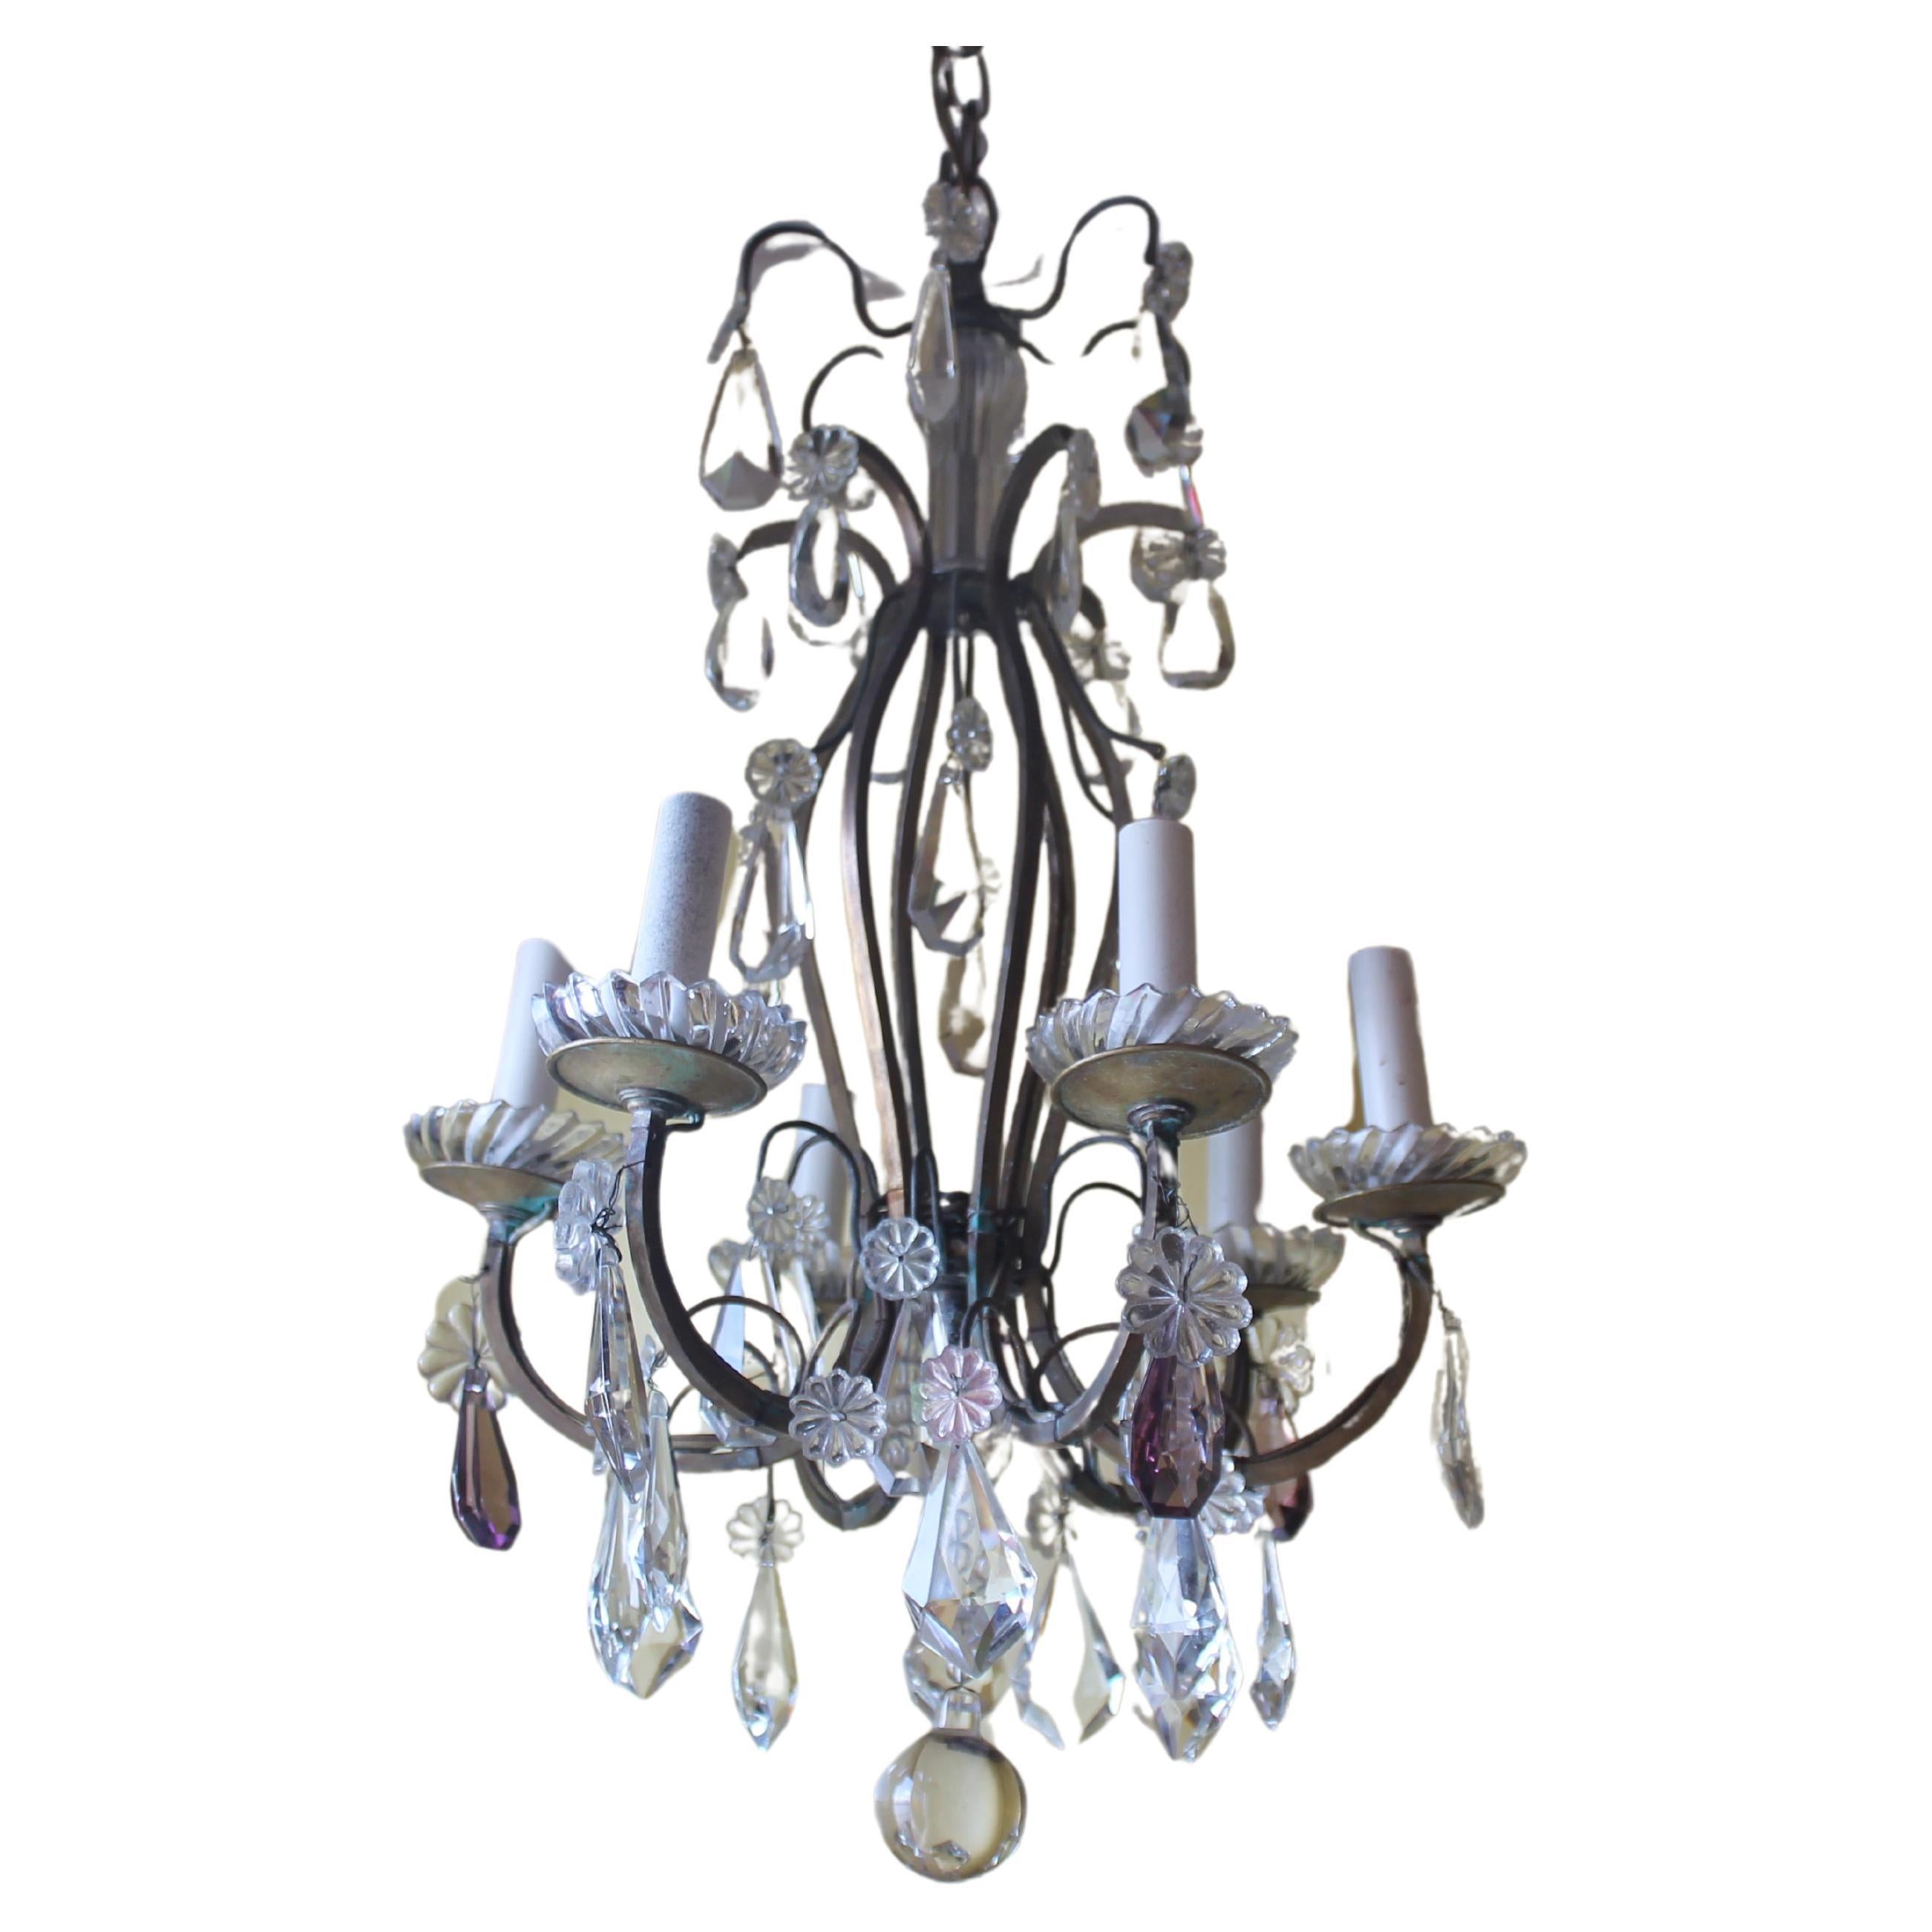 c1910 French Louis XV style Bronze w/ Crystal Chandelier atrributed to Baccarat For Sale